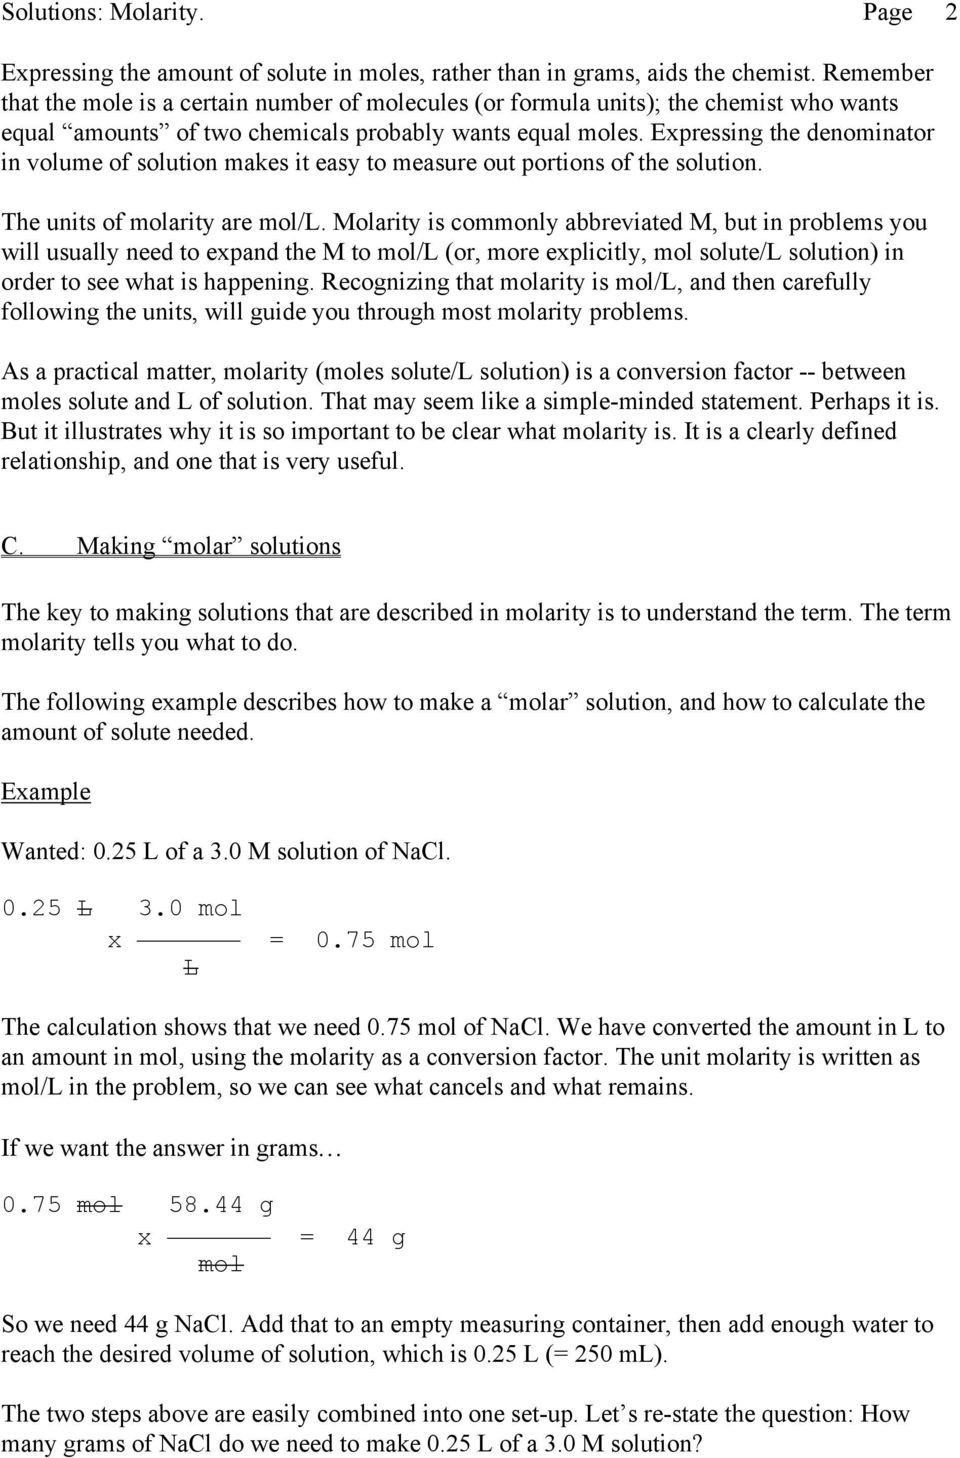 Molarity Practice Worksheet Answer solutions Molarity A Introduction Pdf Free Download